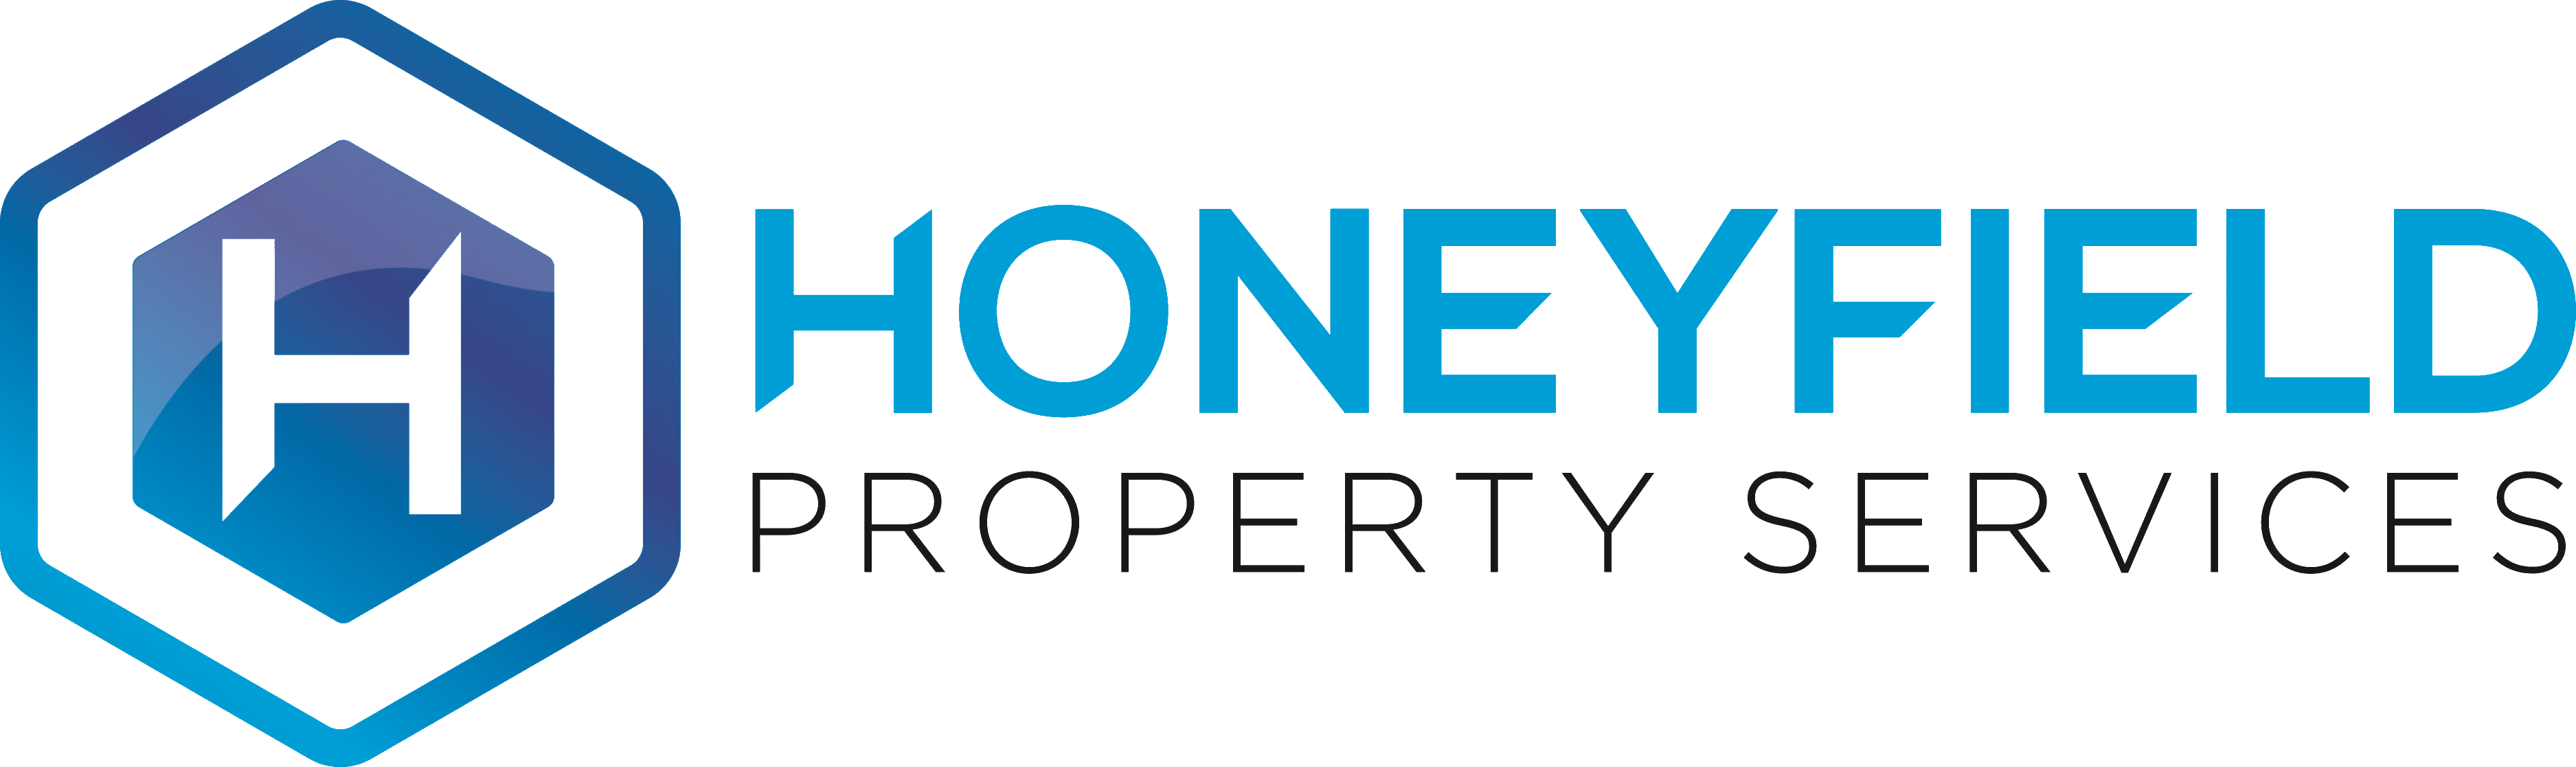 Honeyfield Property Services